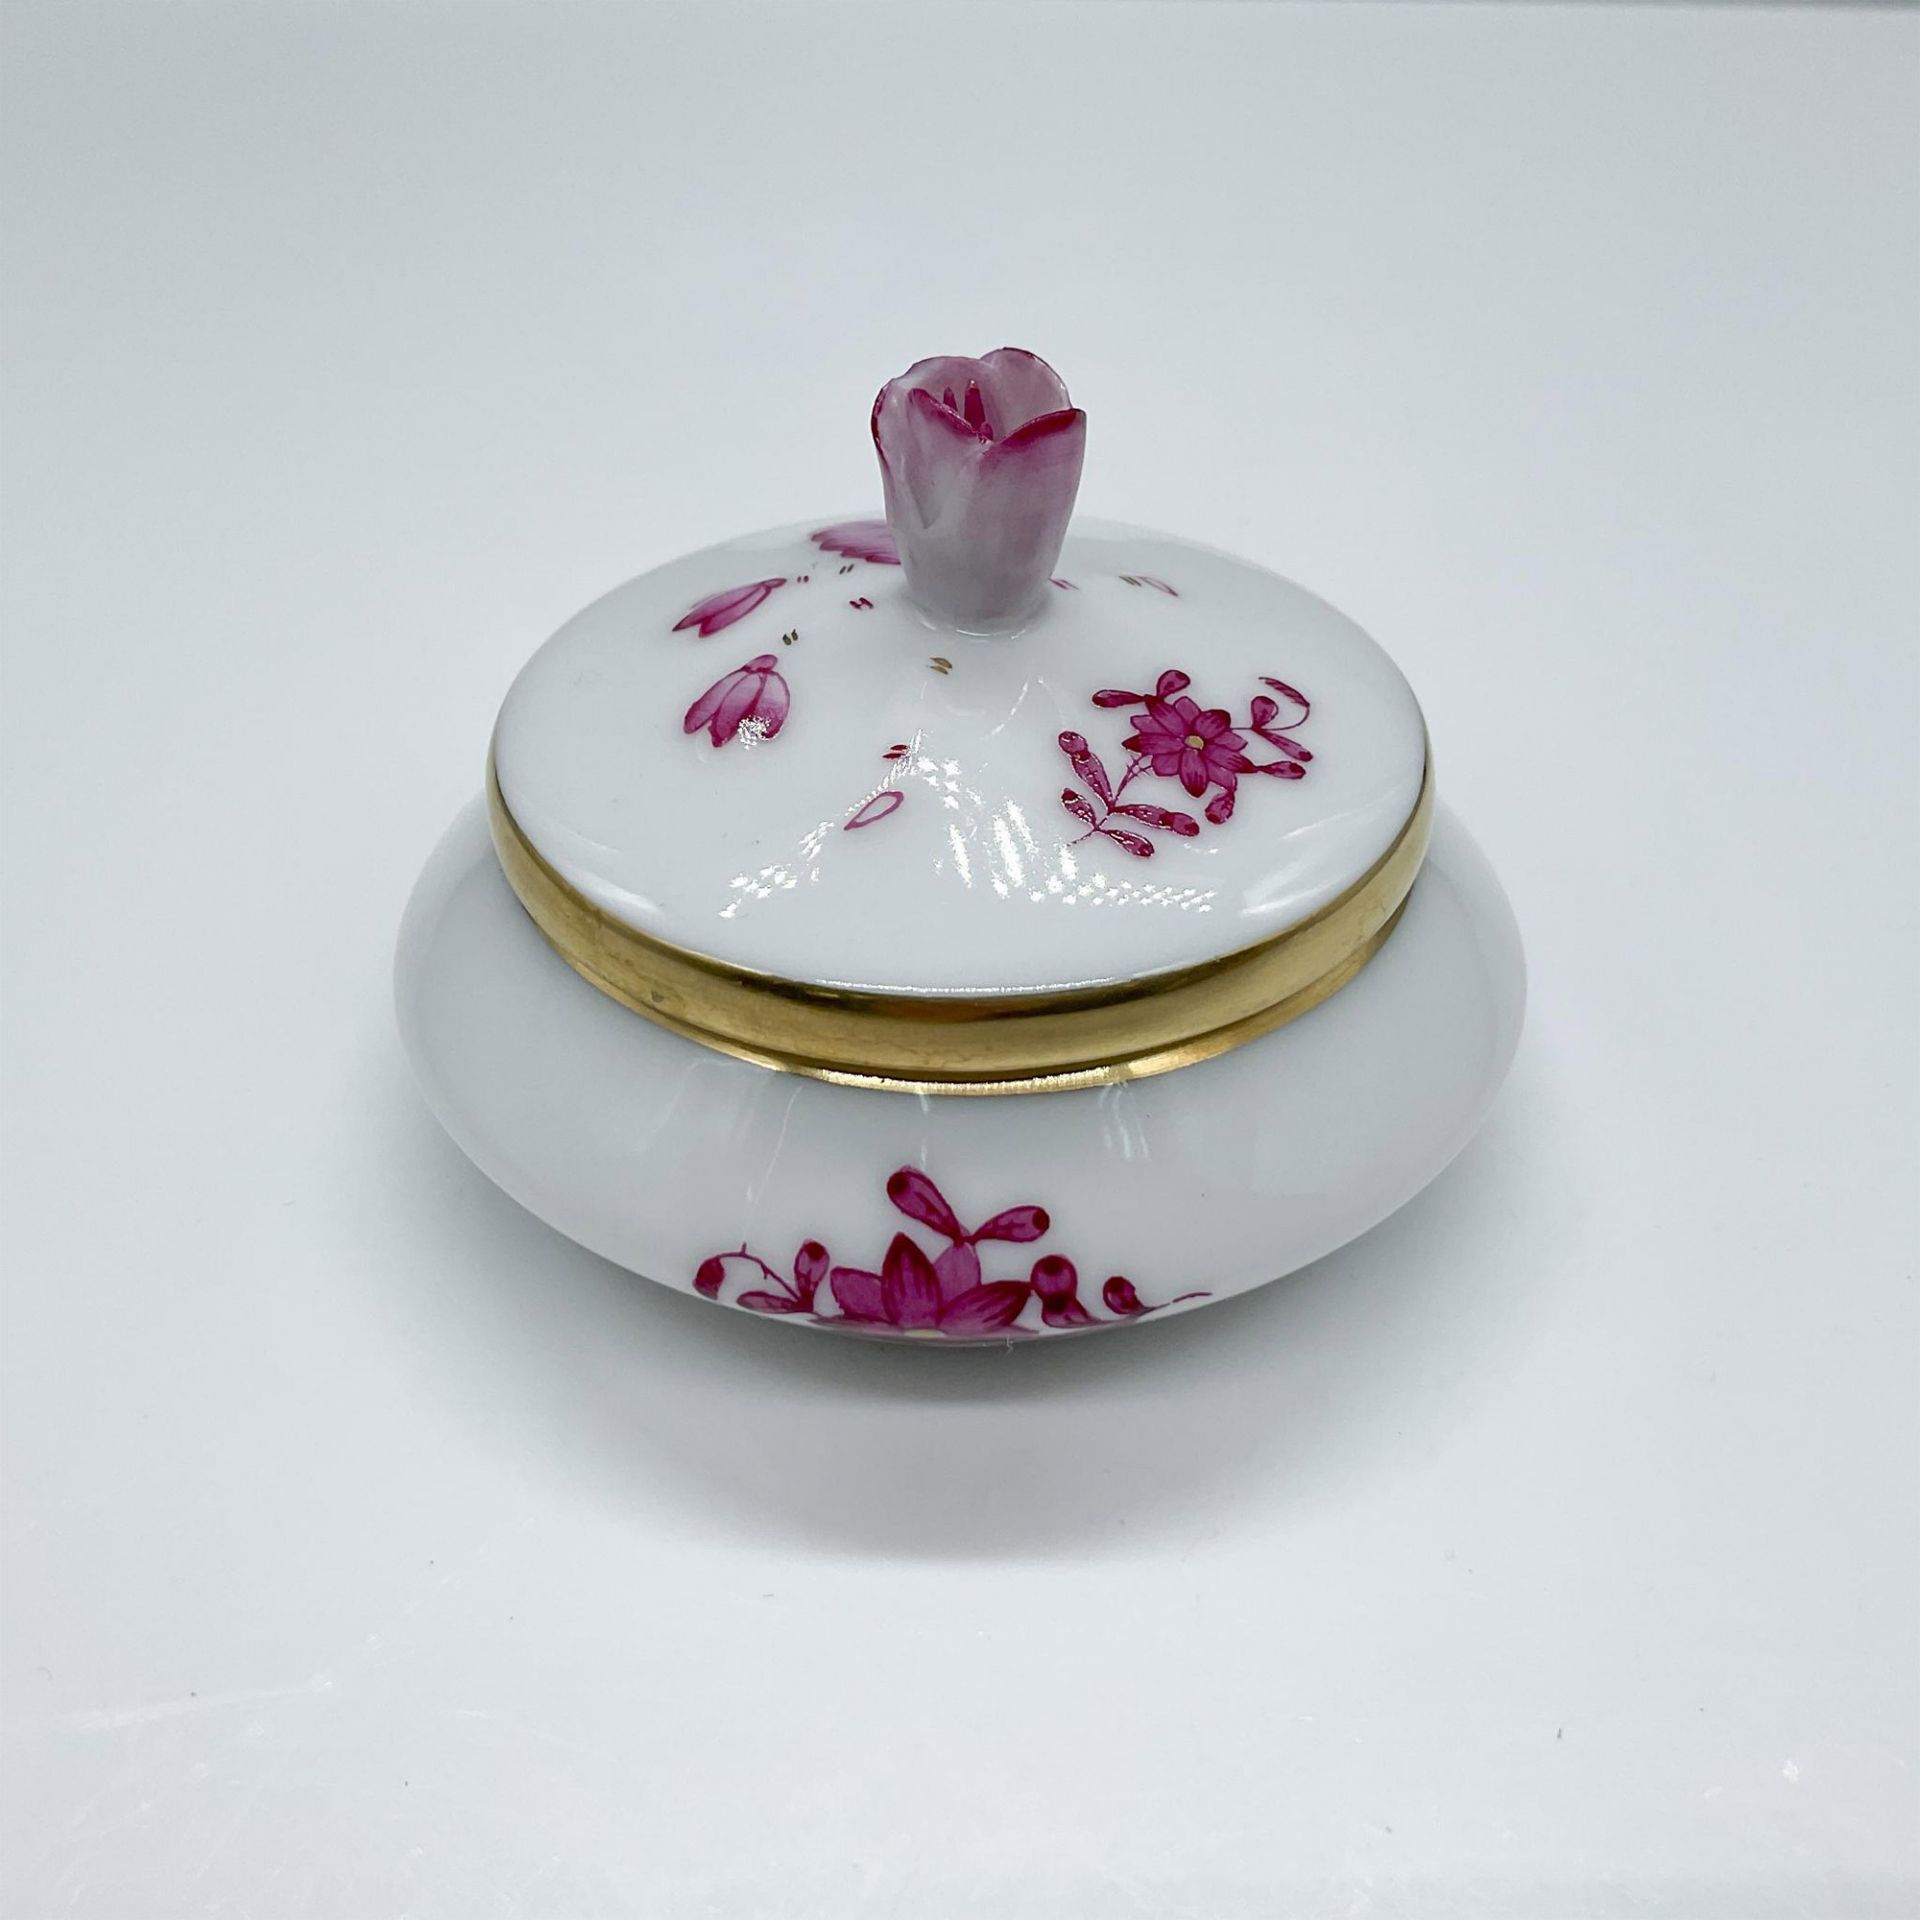 Herend Lidded Treasure Box, Rose Pink Bouquet 6027 - Image 2 of 4